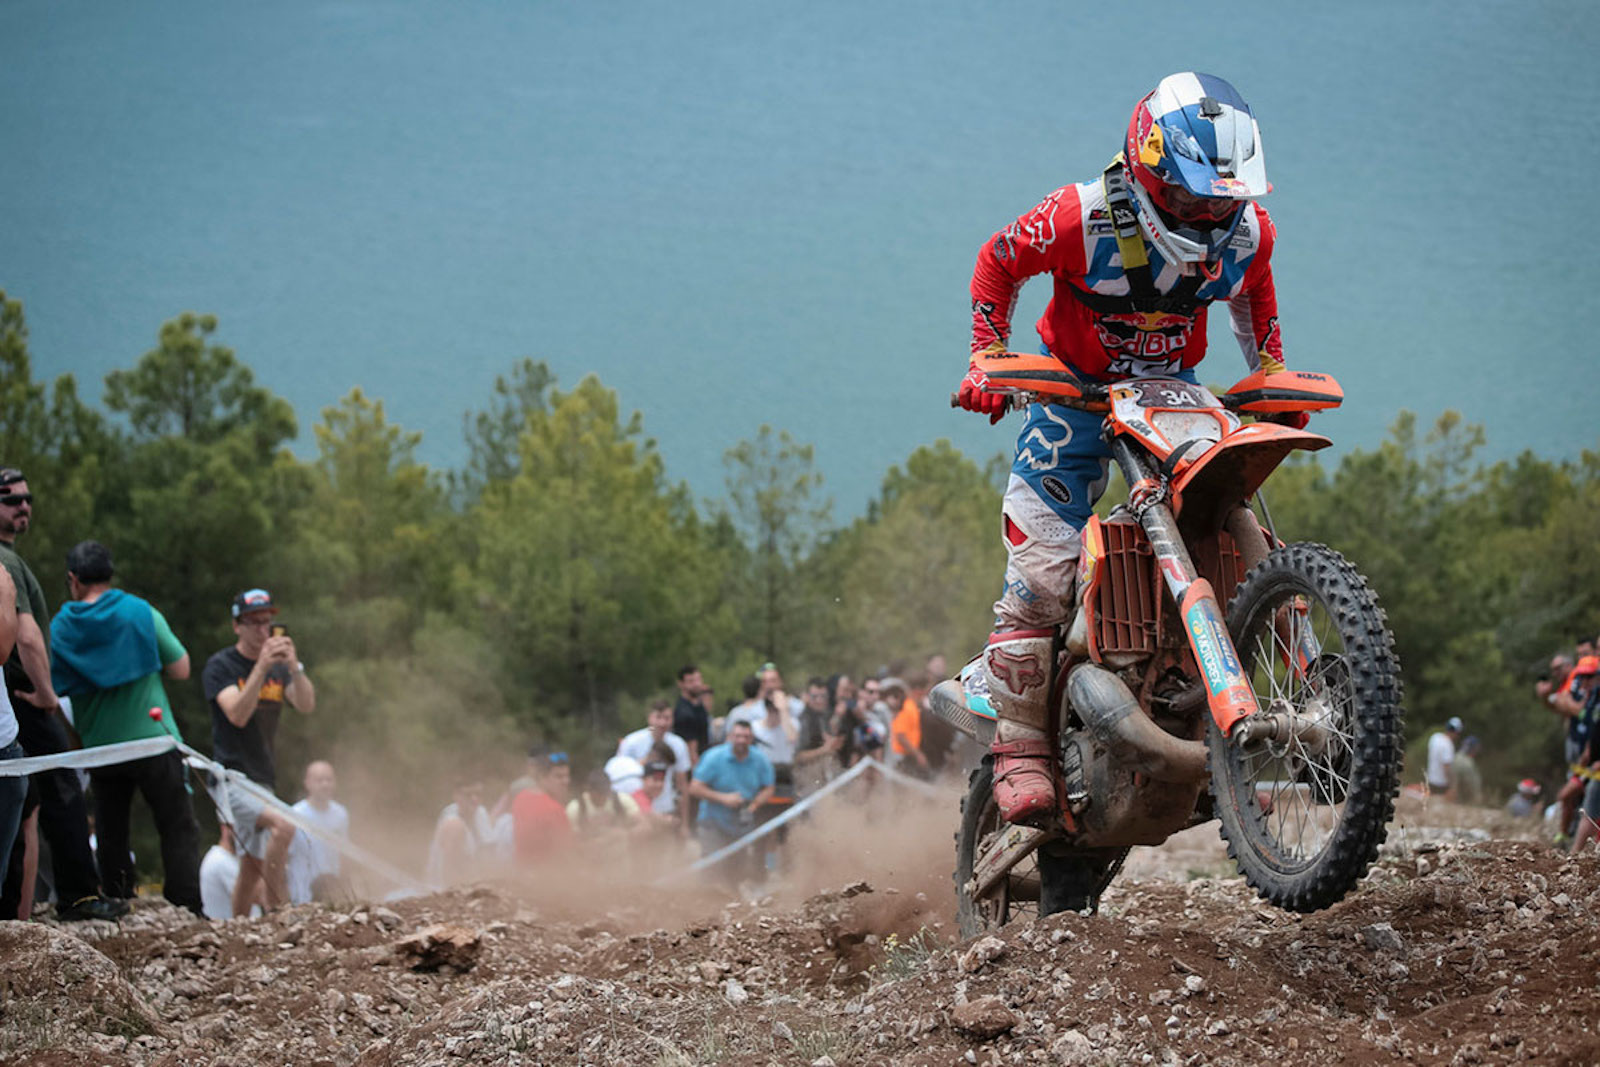 Preview video: BR2 Enduro Solsona – WESS back to traditional enduro for round 7